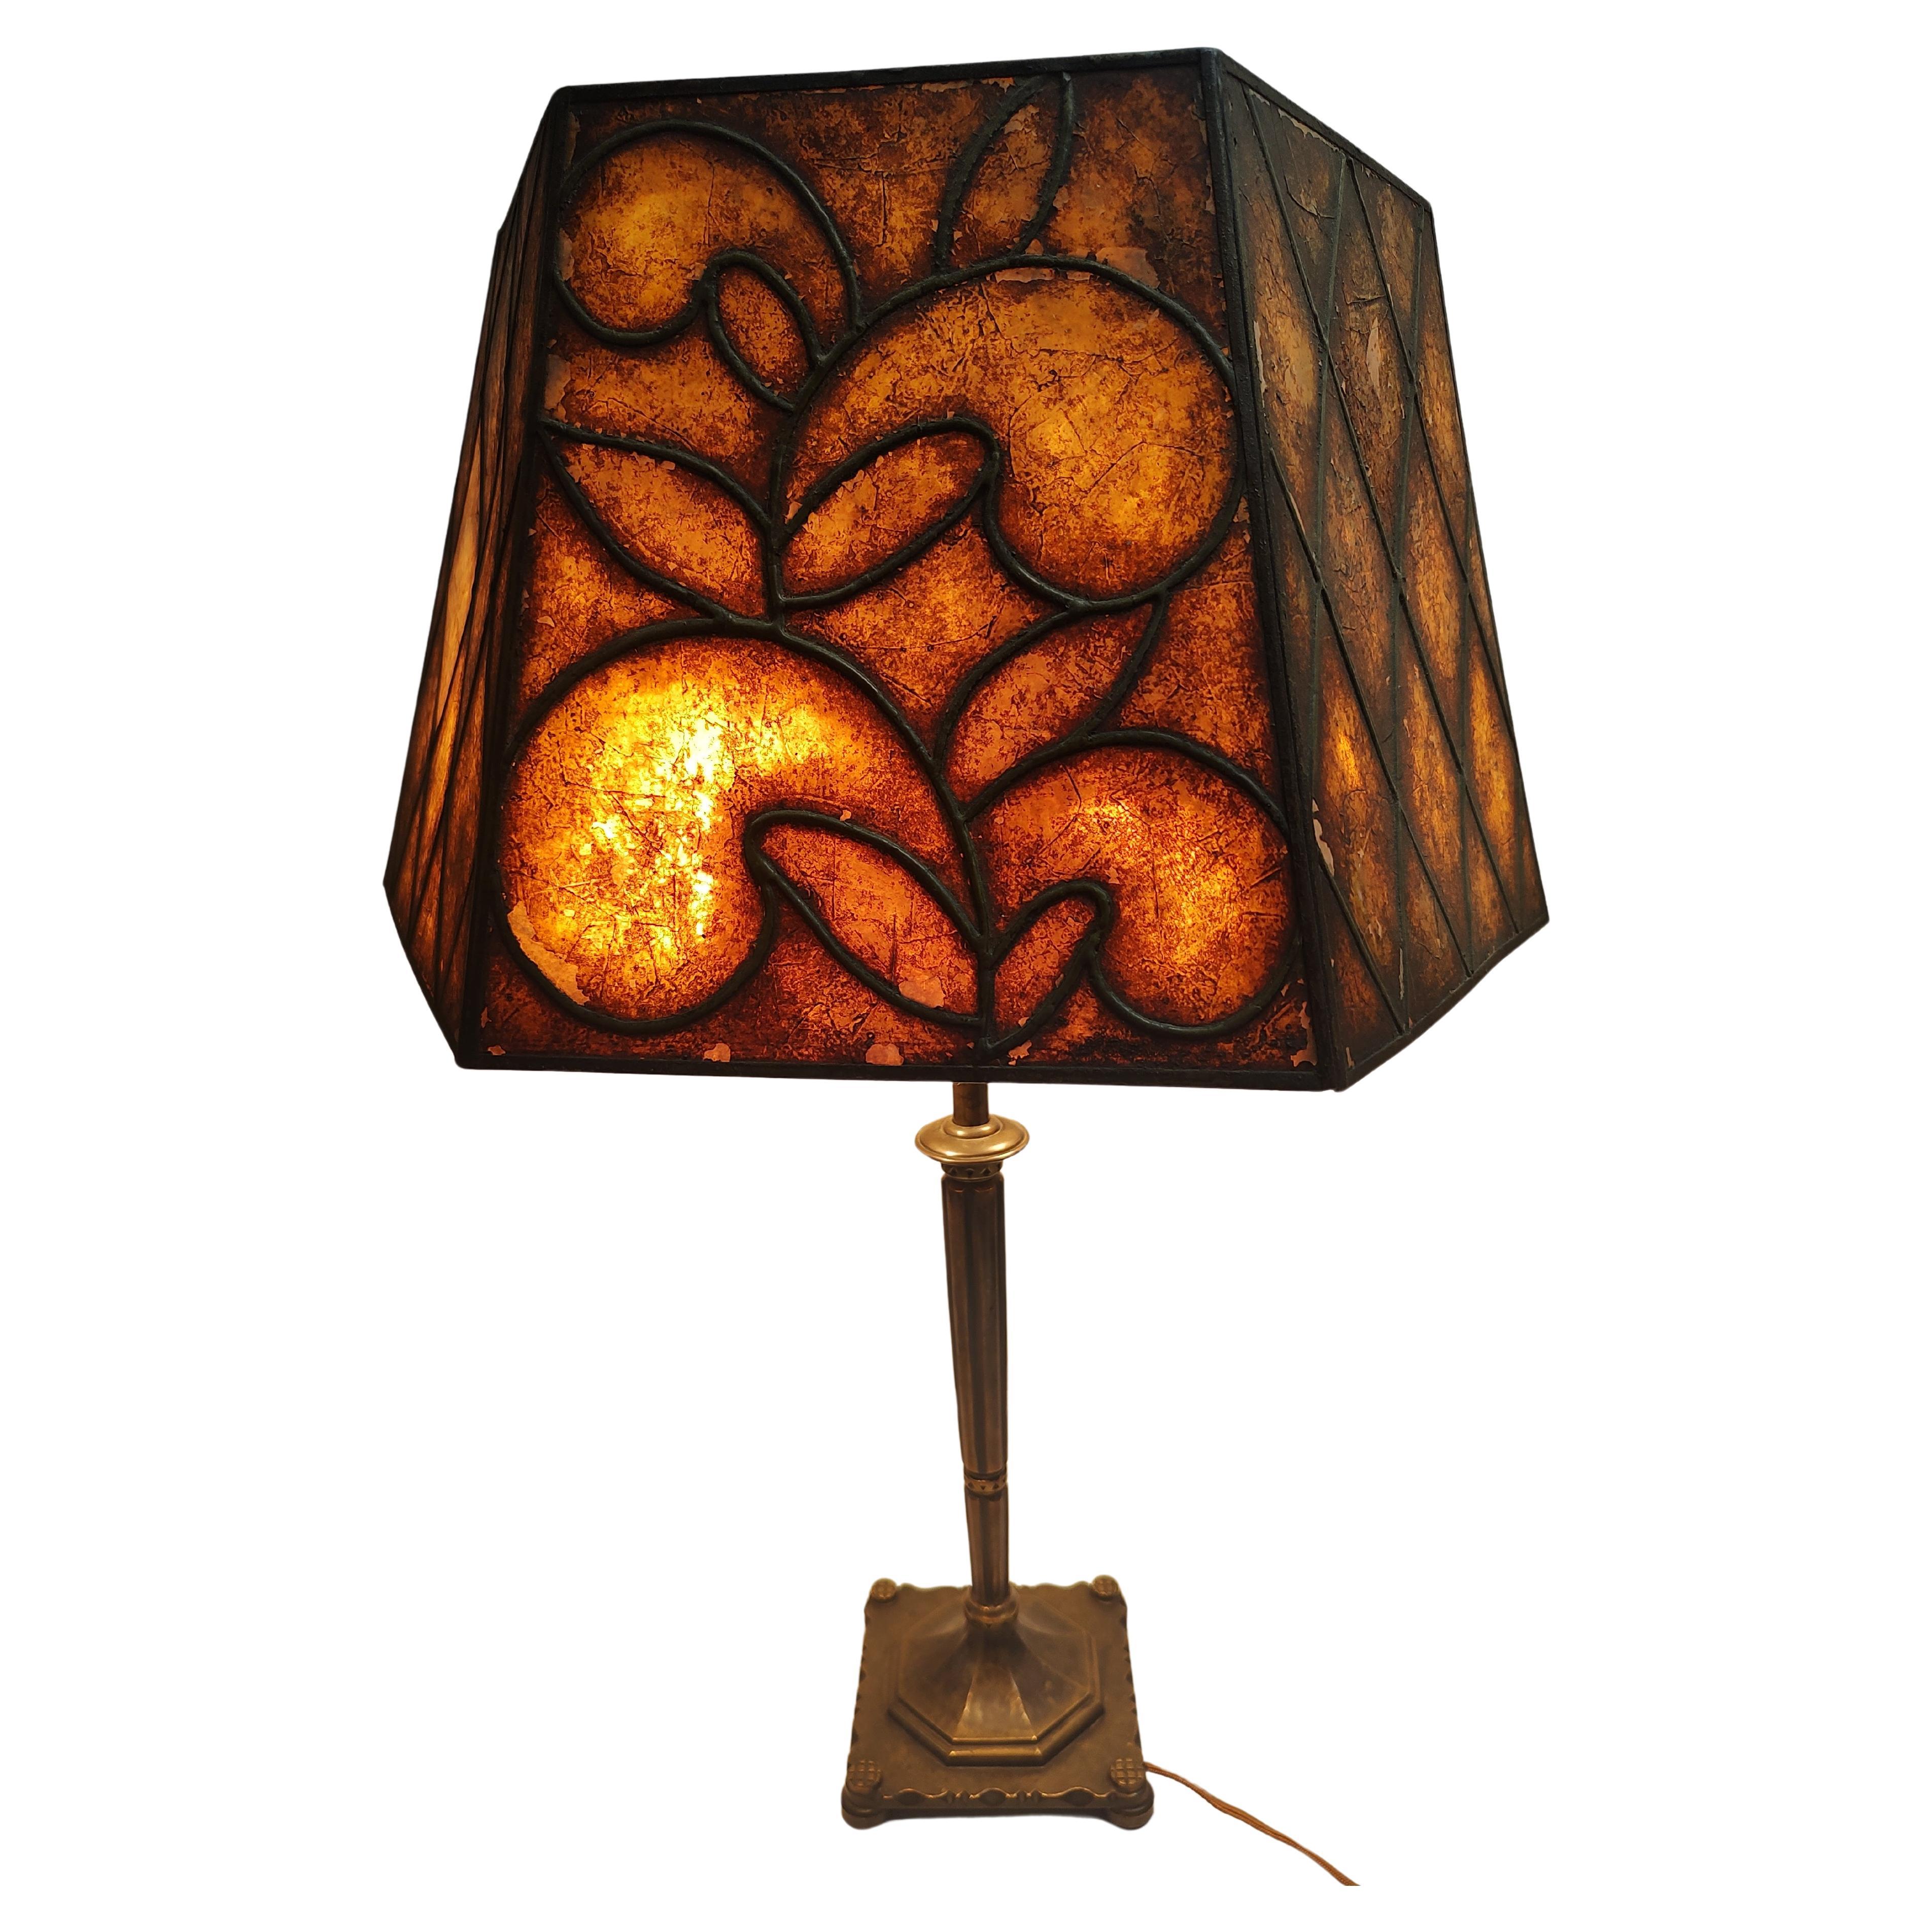 Art Deco Bronze Table Lamp with a Stylized Mica Shade by Oscar Bach